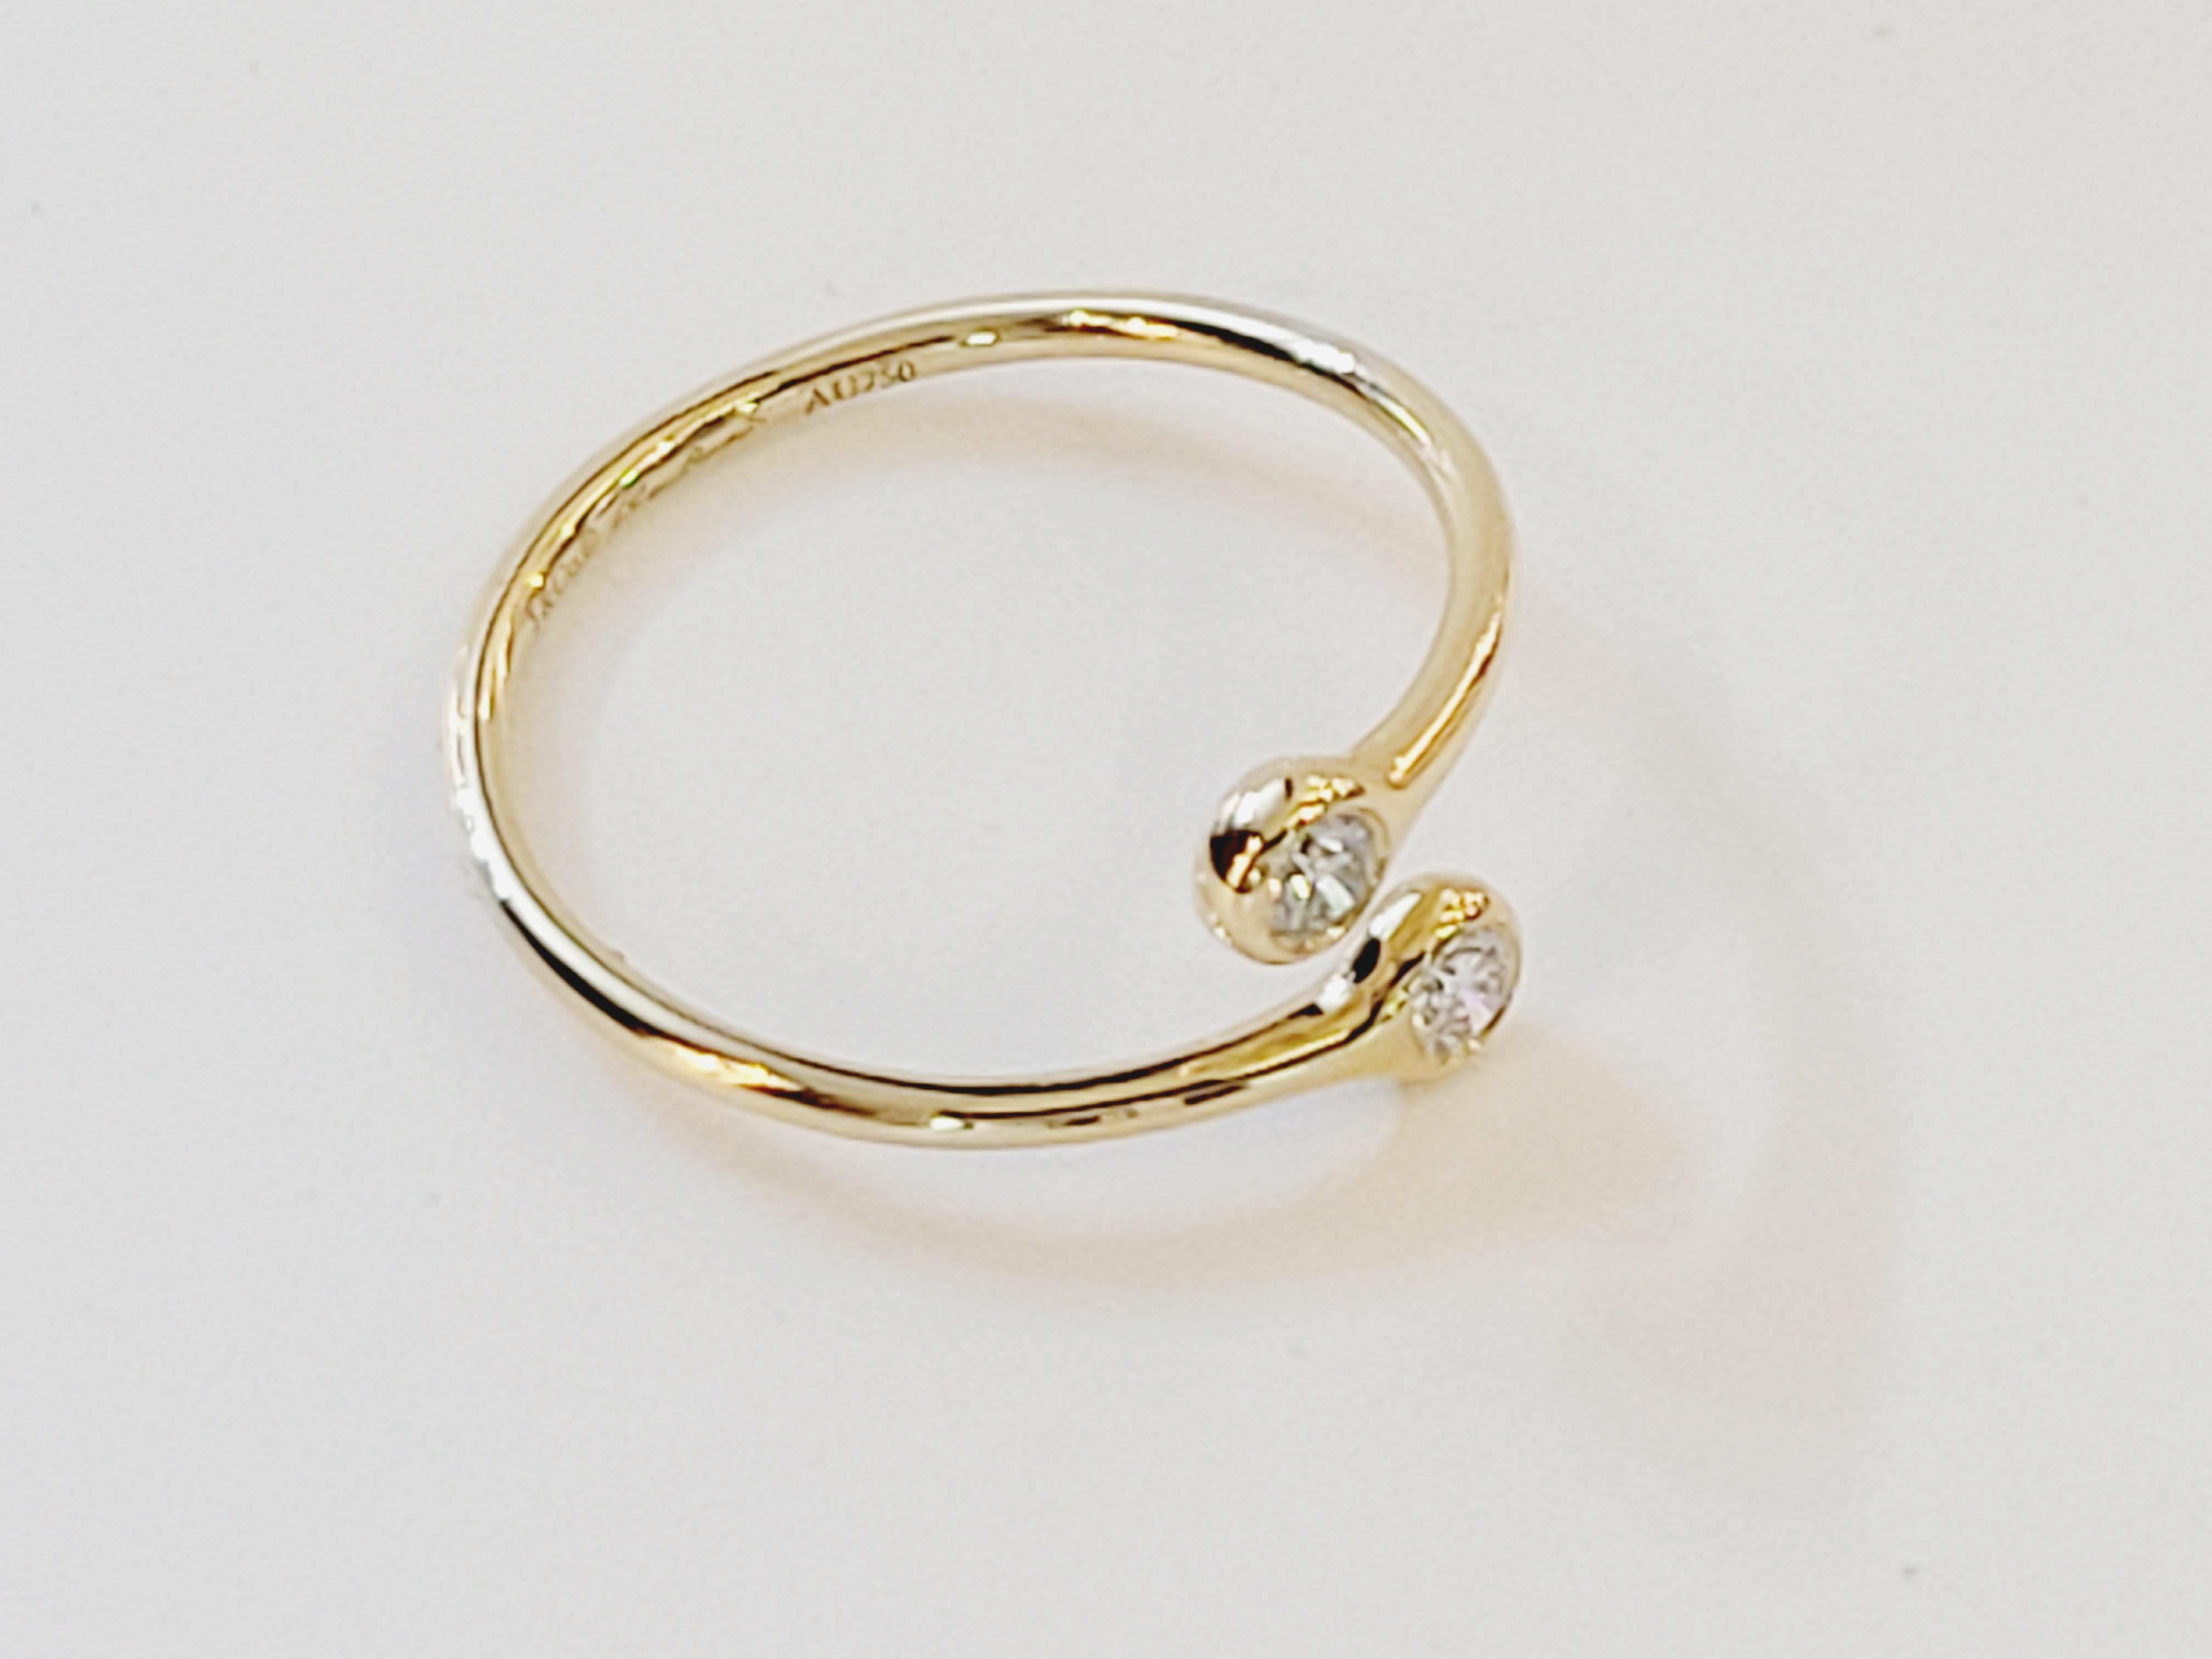 Tiffany & co peretti diamond 18k yellow gold hoop bypass band ring In Excellent Condition For Sale In New York, NY